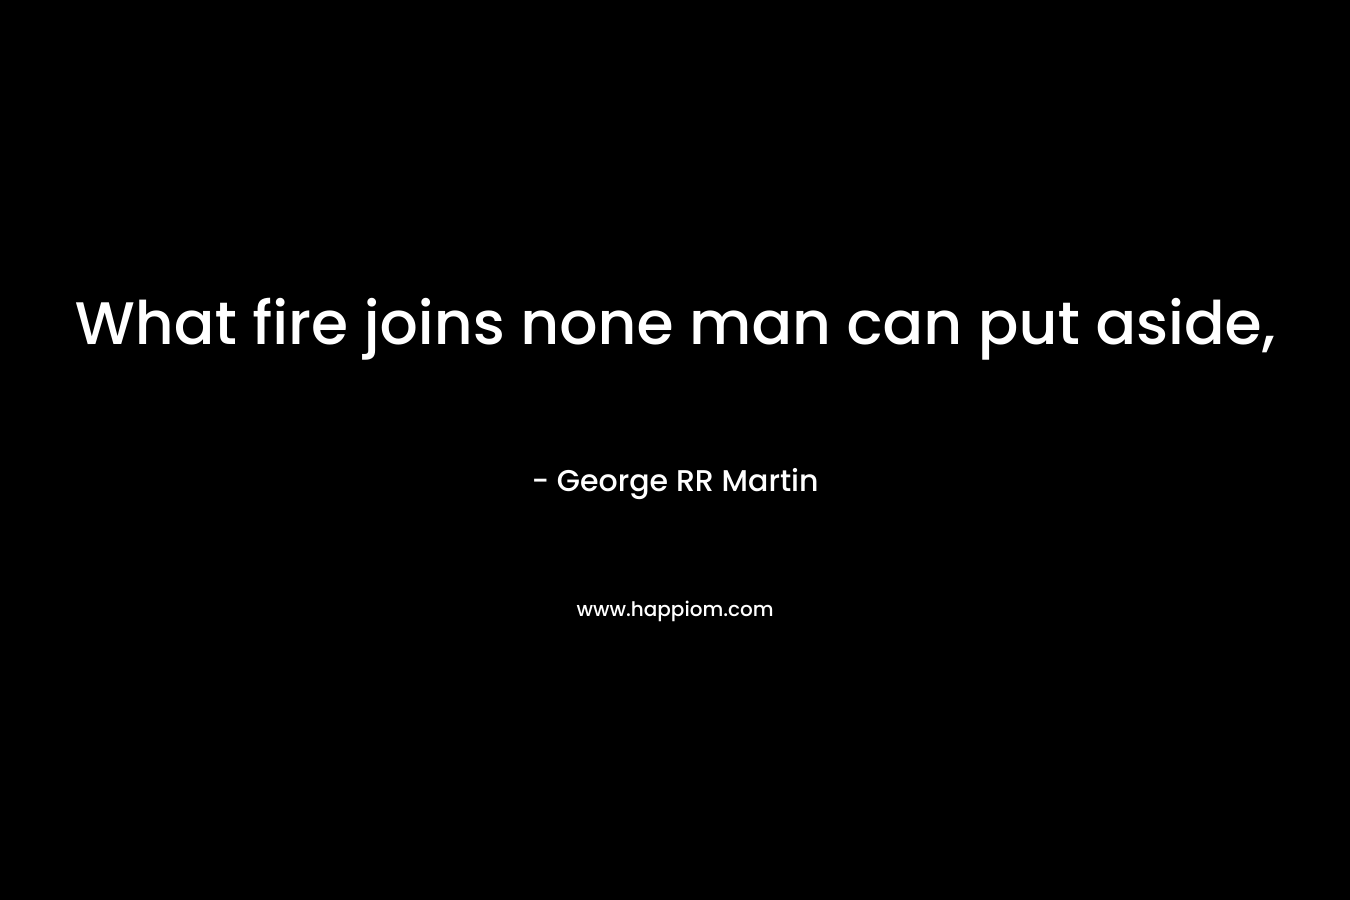 What fire joins none man can put aside, – George RR Martin